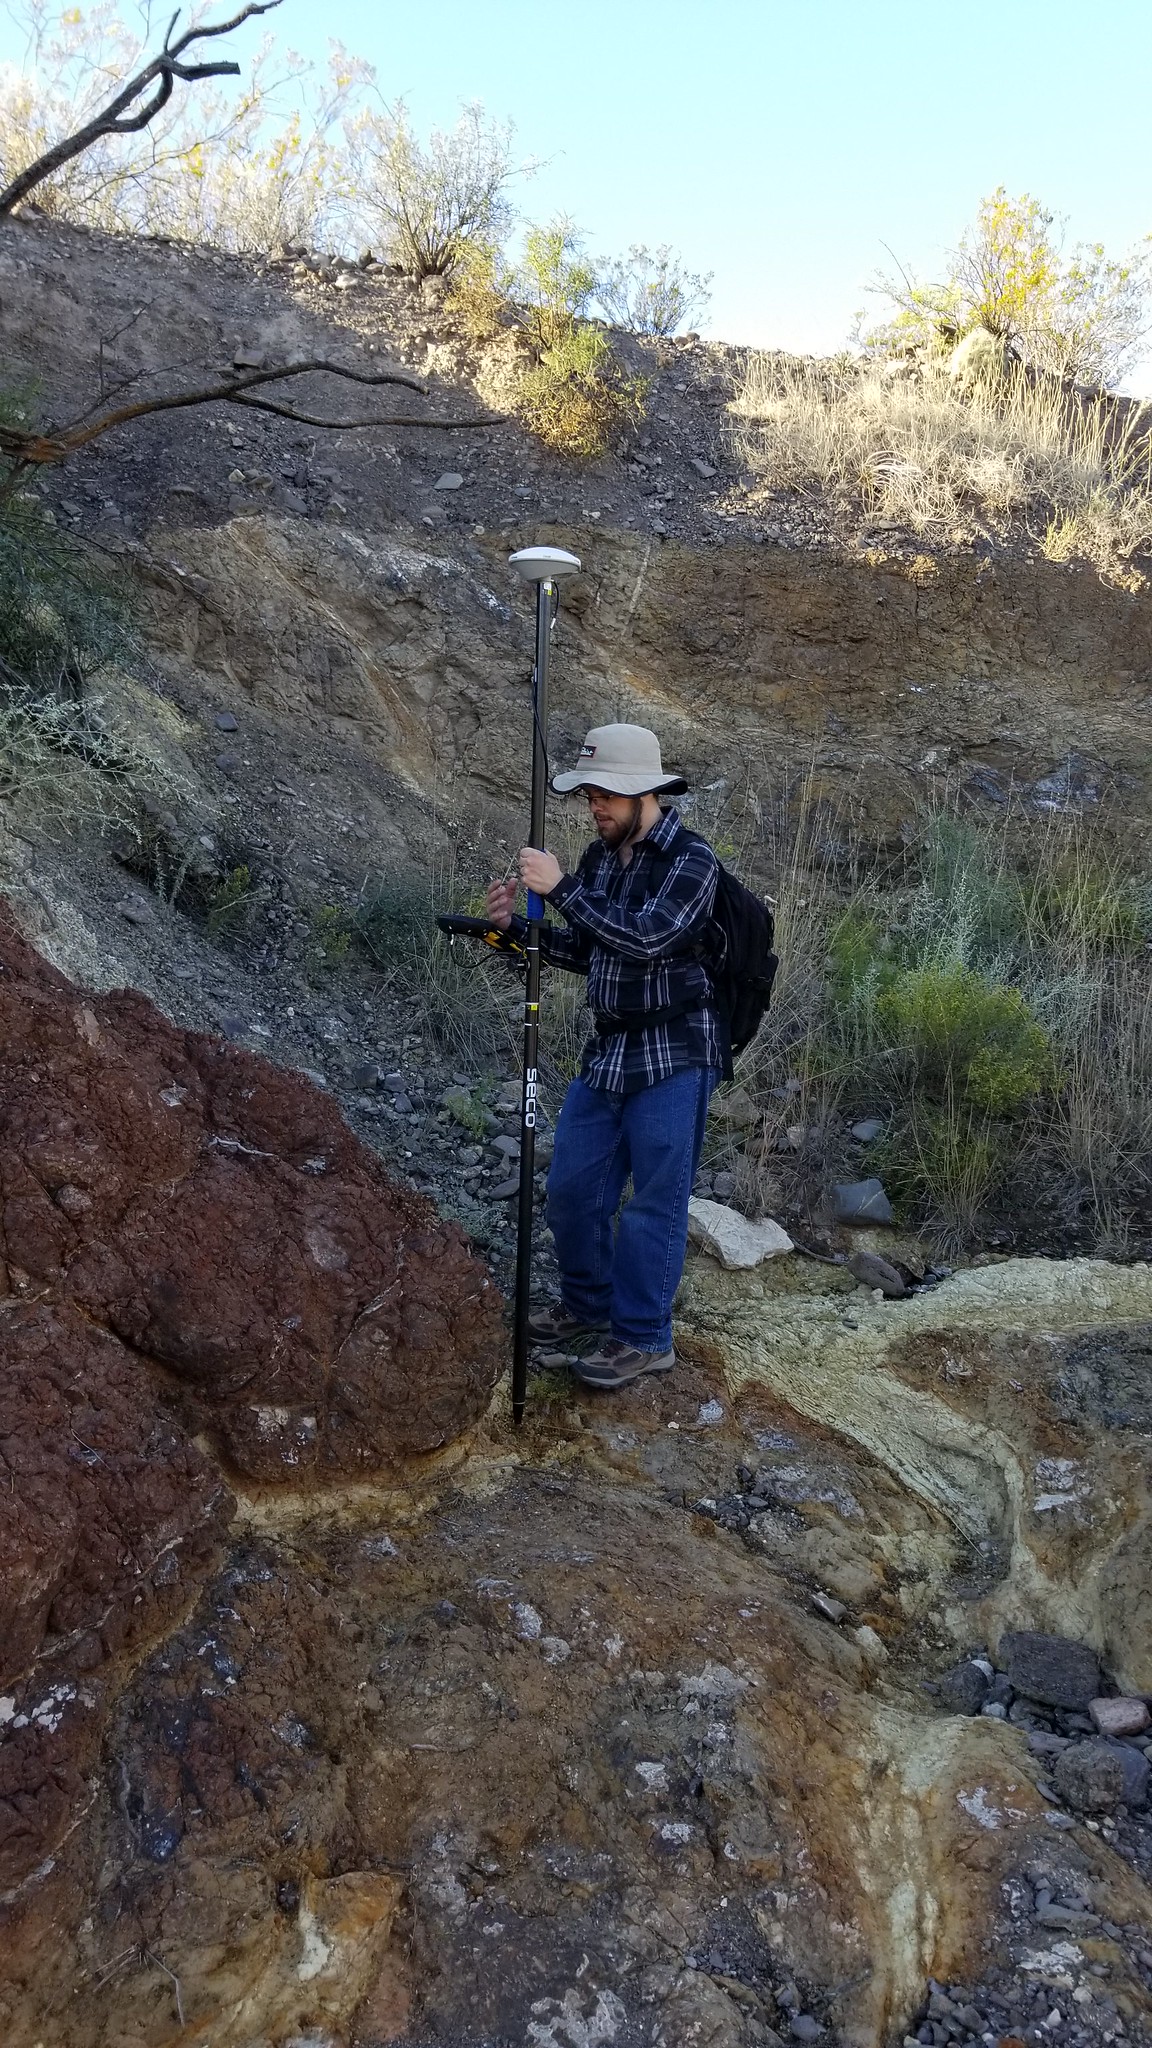 Evan using the TDC 150 at Dalquest Desert Research Station